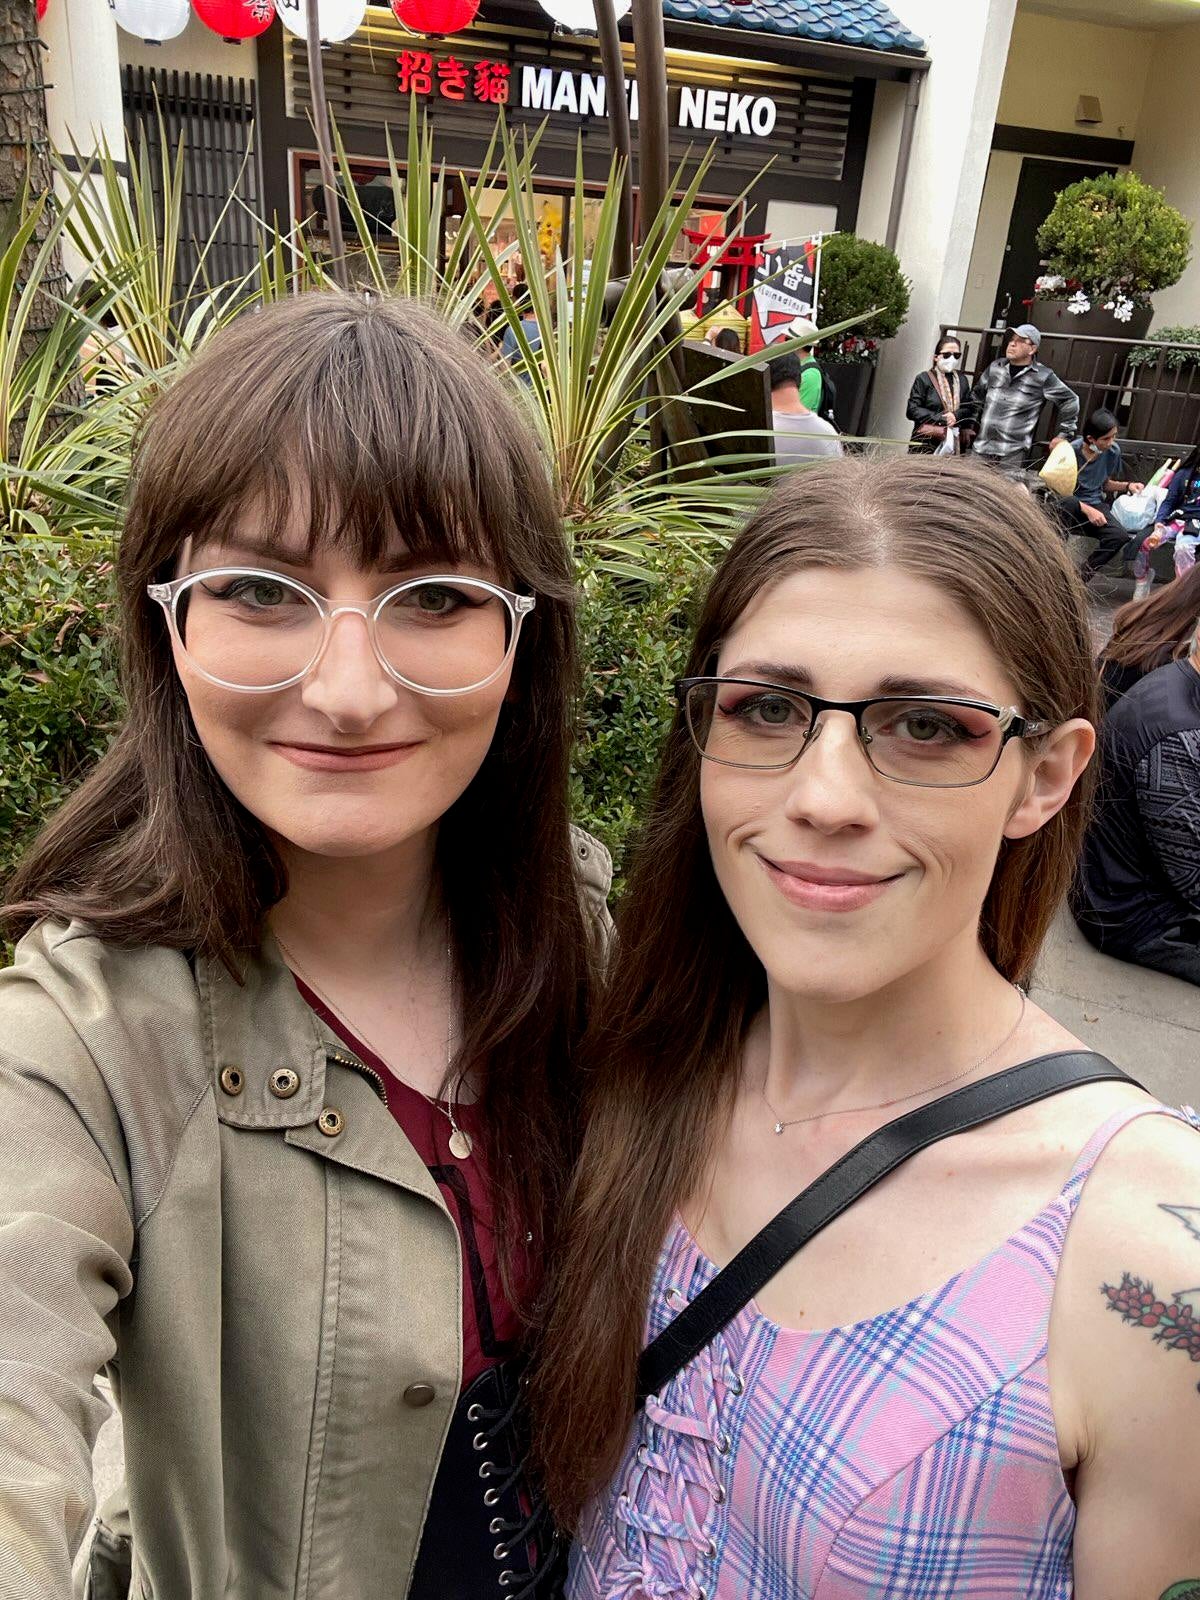 My girl and I walking around little Tokyo, How do we look? zw187u - transexual woman